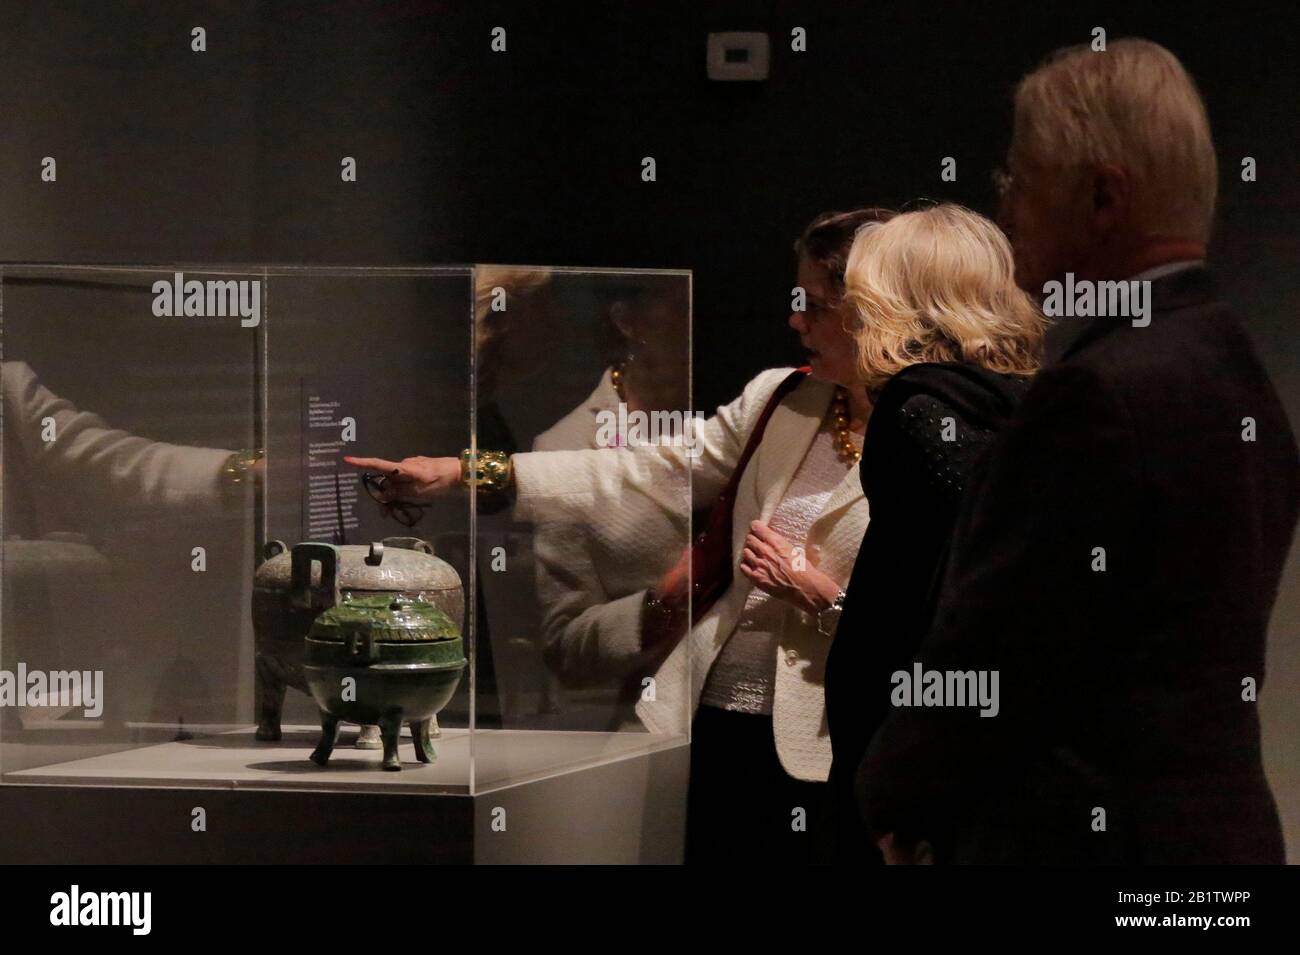 Houston, USA. 26th Feb, 2020. People view Chinese ritual bronzes during a media preview of the exhibition Eternal Offering: Chinese Ritual Bronzes in Houston, Texas, the United States, on Feb. 26, 2020. An exhibition of ancient Chinese bronze artworks will be on display from Feb. 29 to Aug. 9 at Asia Society Texas Center (ASTC) in Houston, ASTC announced on Wednesday night. Credit: Lao Chengyue/Xinhua/Alamy Live News Stock Photo